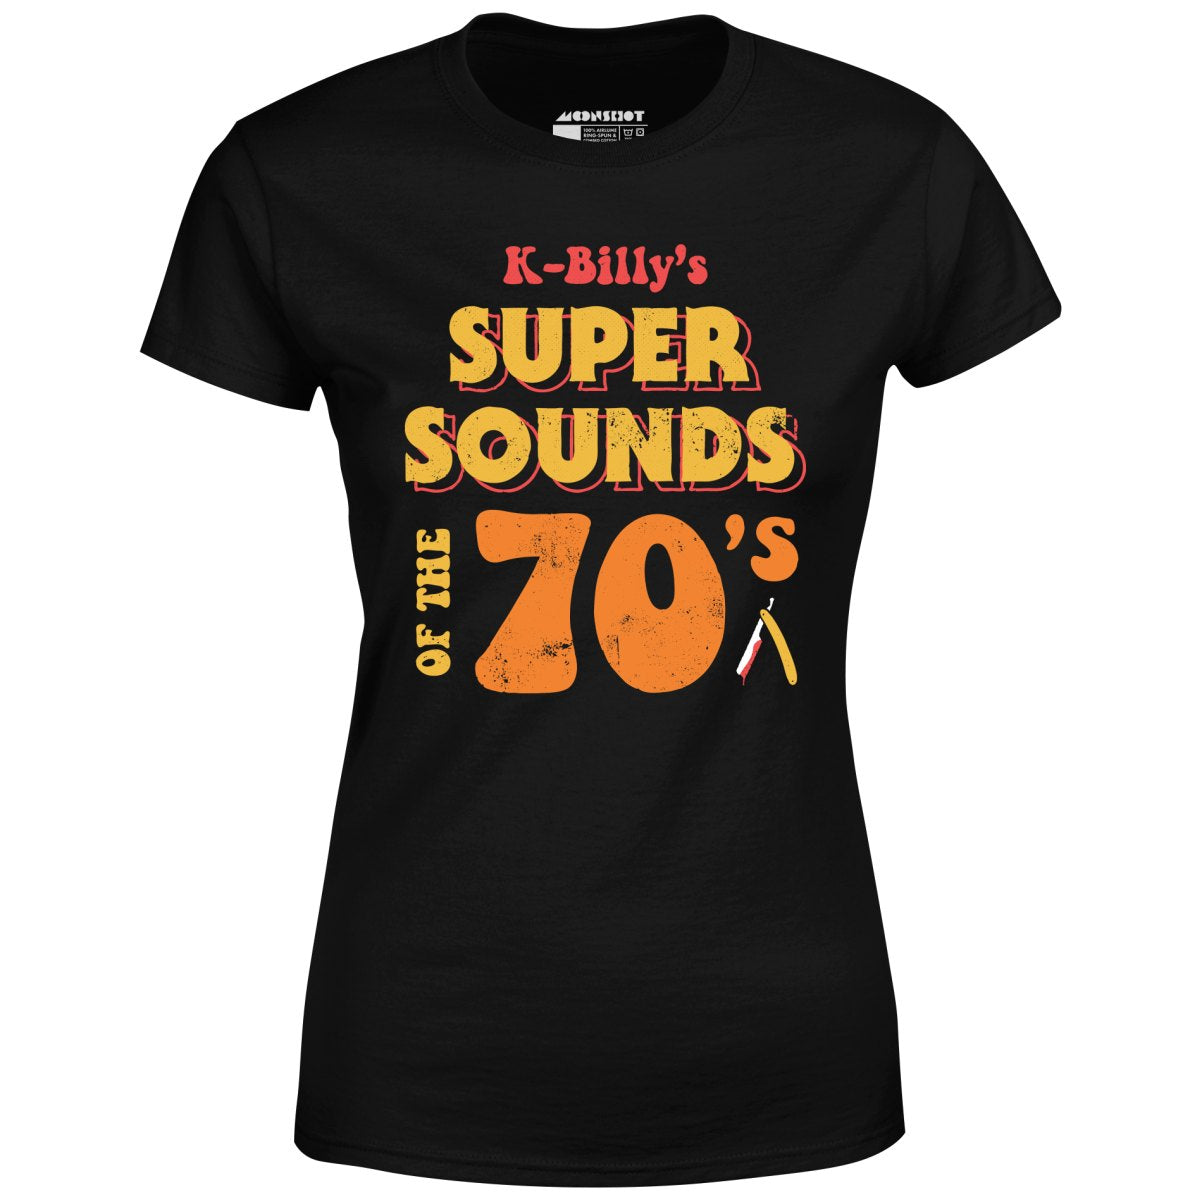 K-Billy's Super Sounds of the 70s - Women's T-Shirt